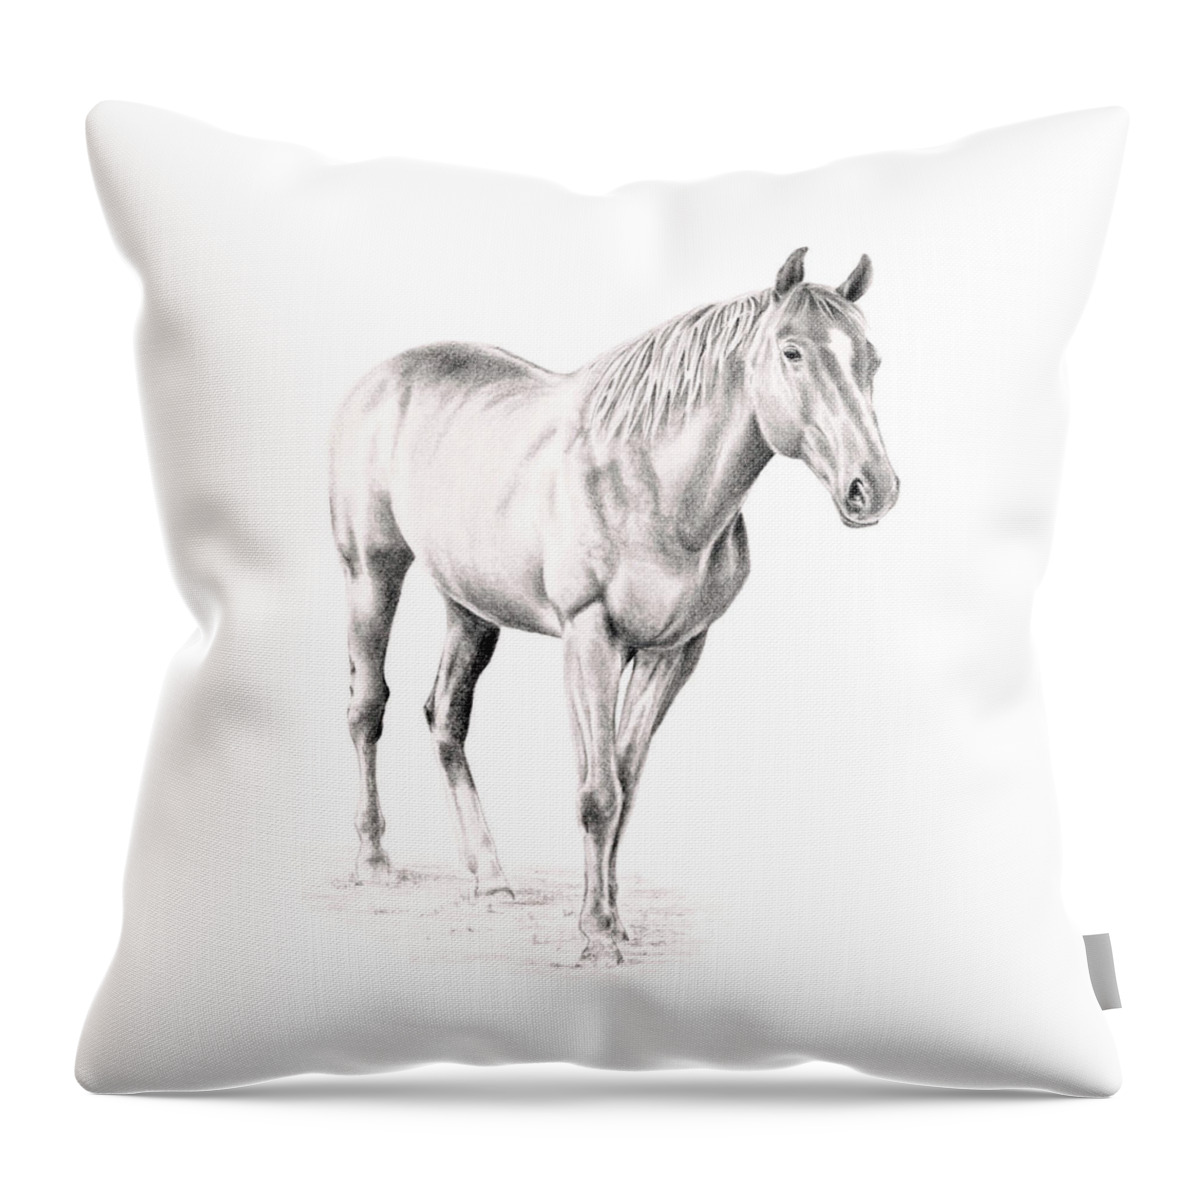 Horse Throw Pillow featuring the drawing Standing Racehorse by Elizabeth Lock